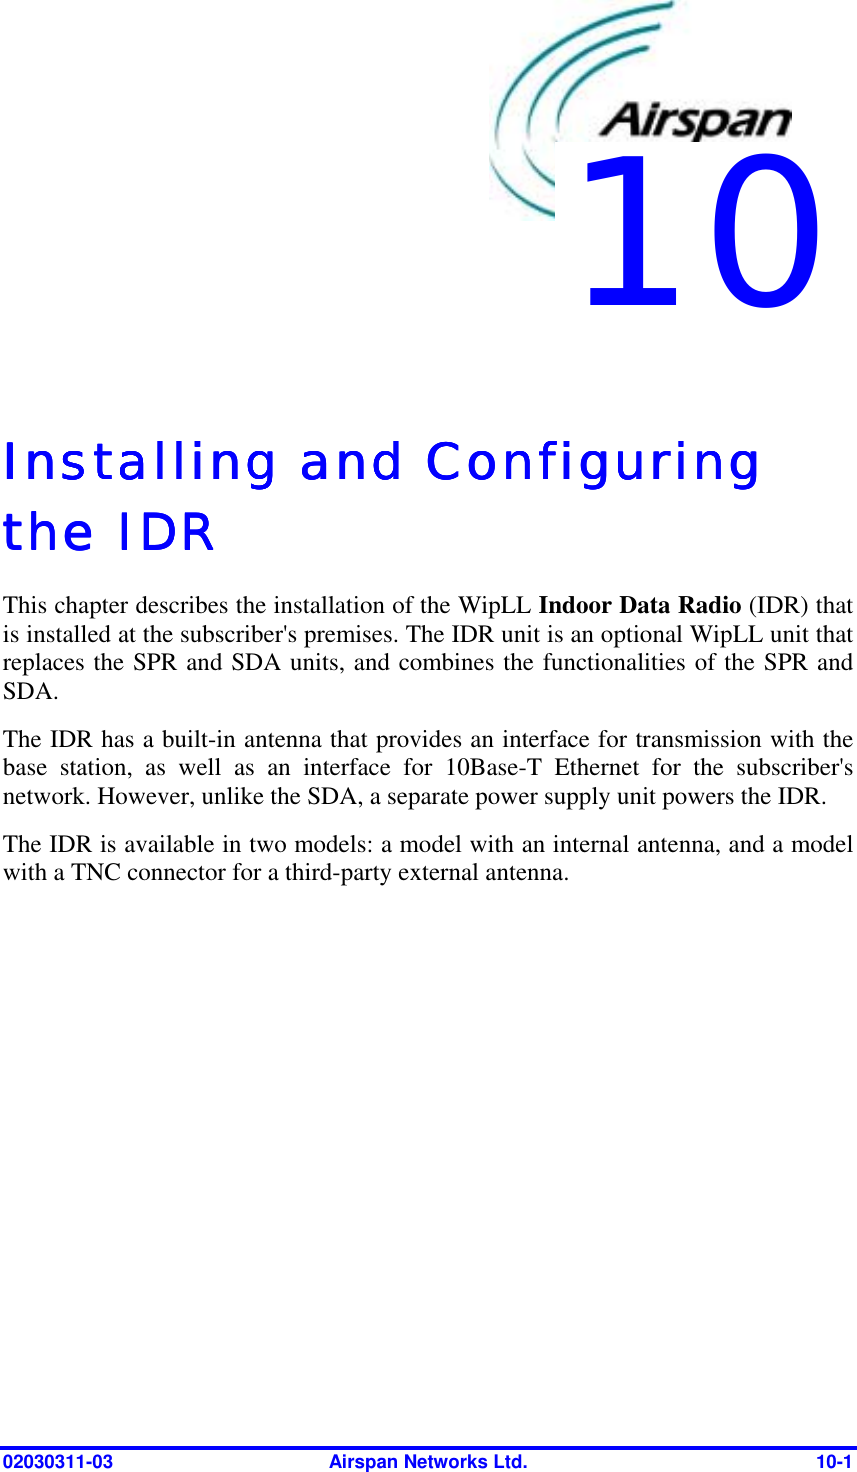  02030311-03  Airspan Networks Ltd.  10-1   Installing and Configuring Installing and Configuring Installing and Configuring Installing and Configuring the IDRthe IDRthe IDRthe IDR    This chapter describes the installation of the WipLL Indoor Data Radio (IDR) that is installed at the subscriber&apos;s premises. The IDR unit is an optional WipLL unit that replaces the SPR and SDA units, and combines the functionalities of the SPR and SDA. The IDR has a built-in antenna that provides an interface for transmission with the base station, as well as an interface for 10Base-T Ethernet for the subscriber&apos;s network. However, unlike the SDA, a separate power supply unit powers the IDR. The IDR is available in two models: a model with an internal antenna, and a model with a TNC connector for a third-party external antenna. 10